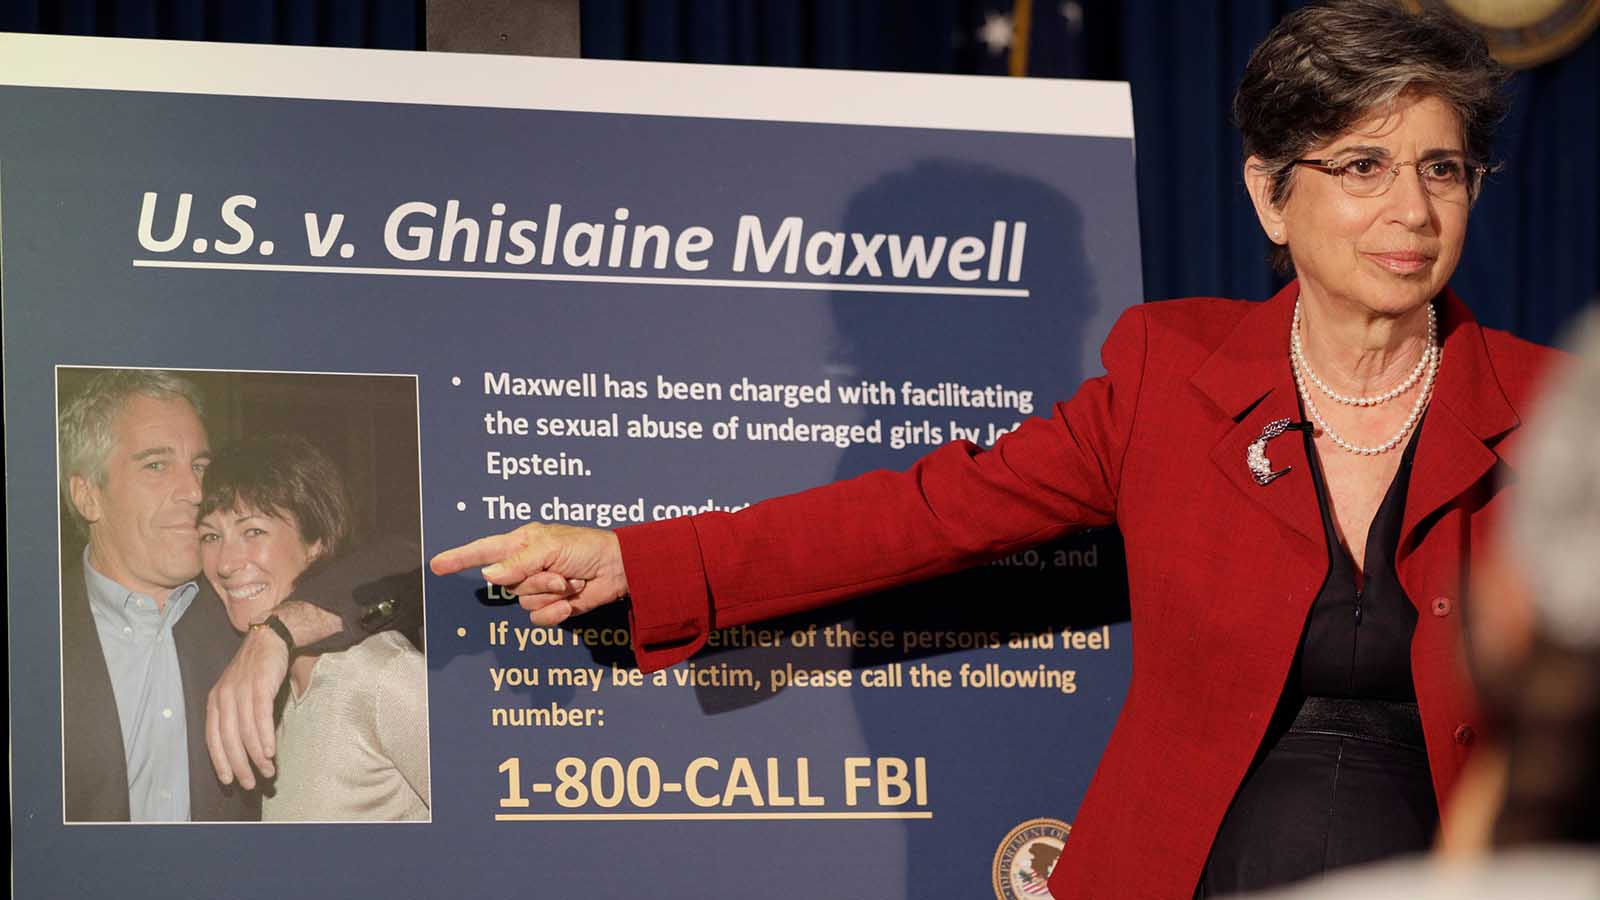 It took nearly a year after Epstein's arrest to find Ghislaine Maxwell. So where did she spend the first half of 2020 hiding from the FBI?